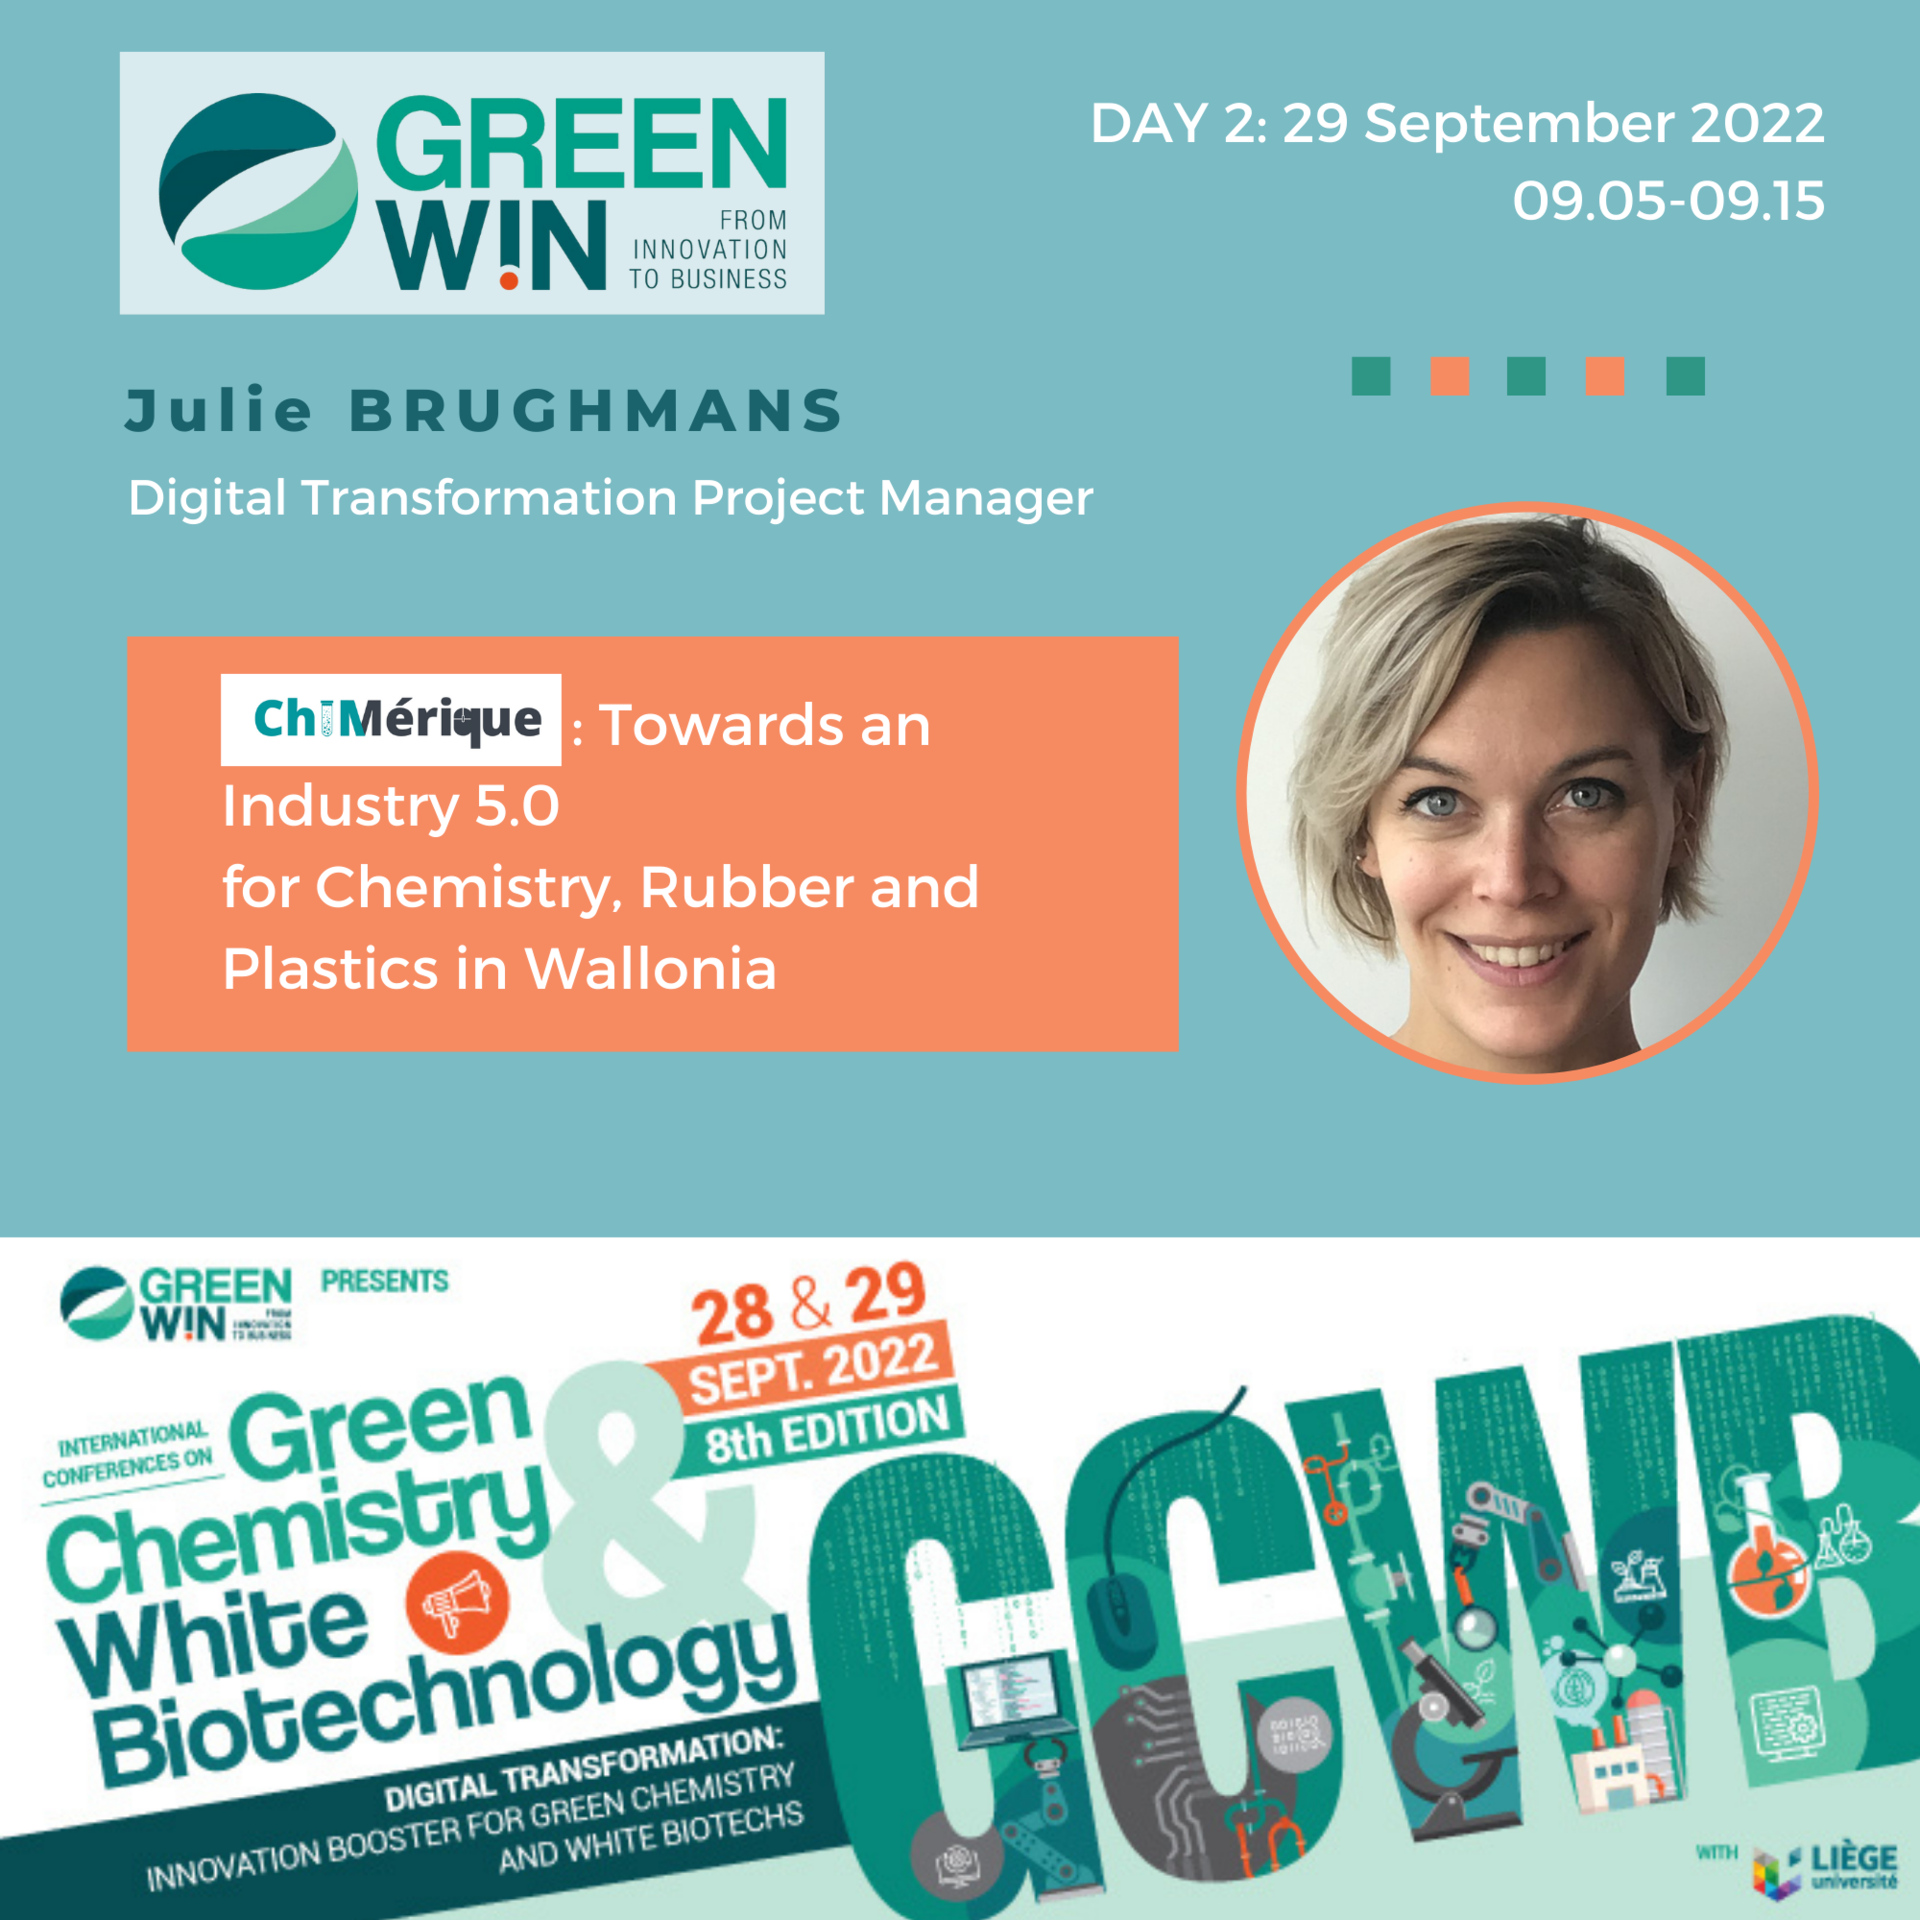 Meet Julie BRUGHMANS, Digital Transition Manager at GreenWin, and find out it all about ChiMérique